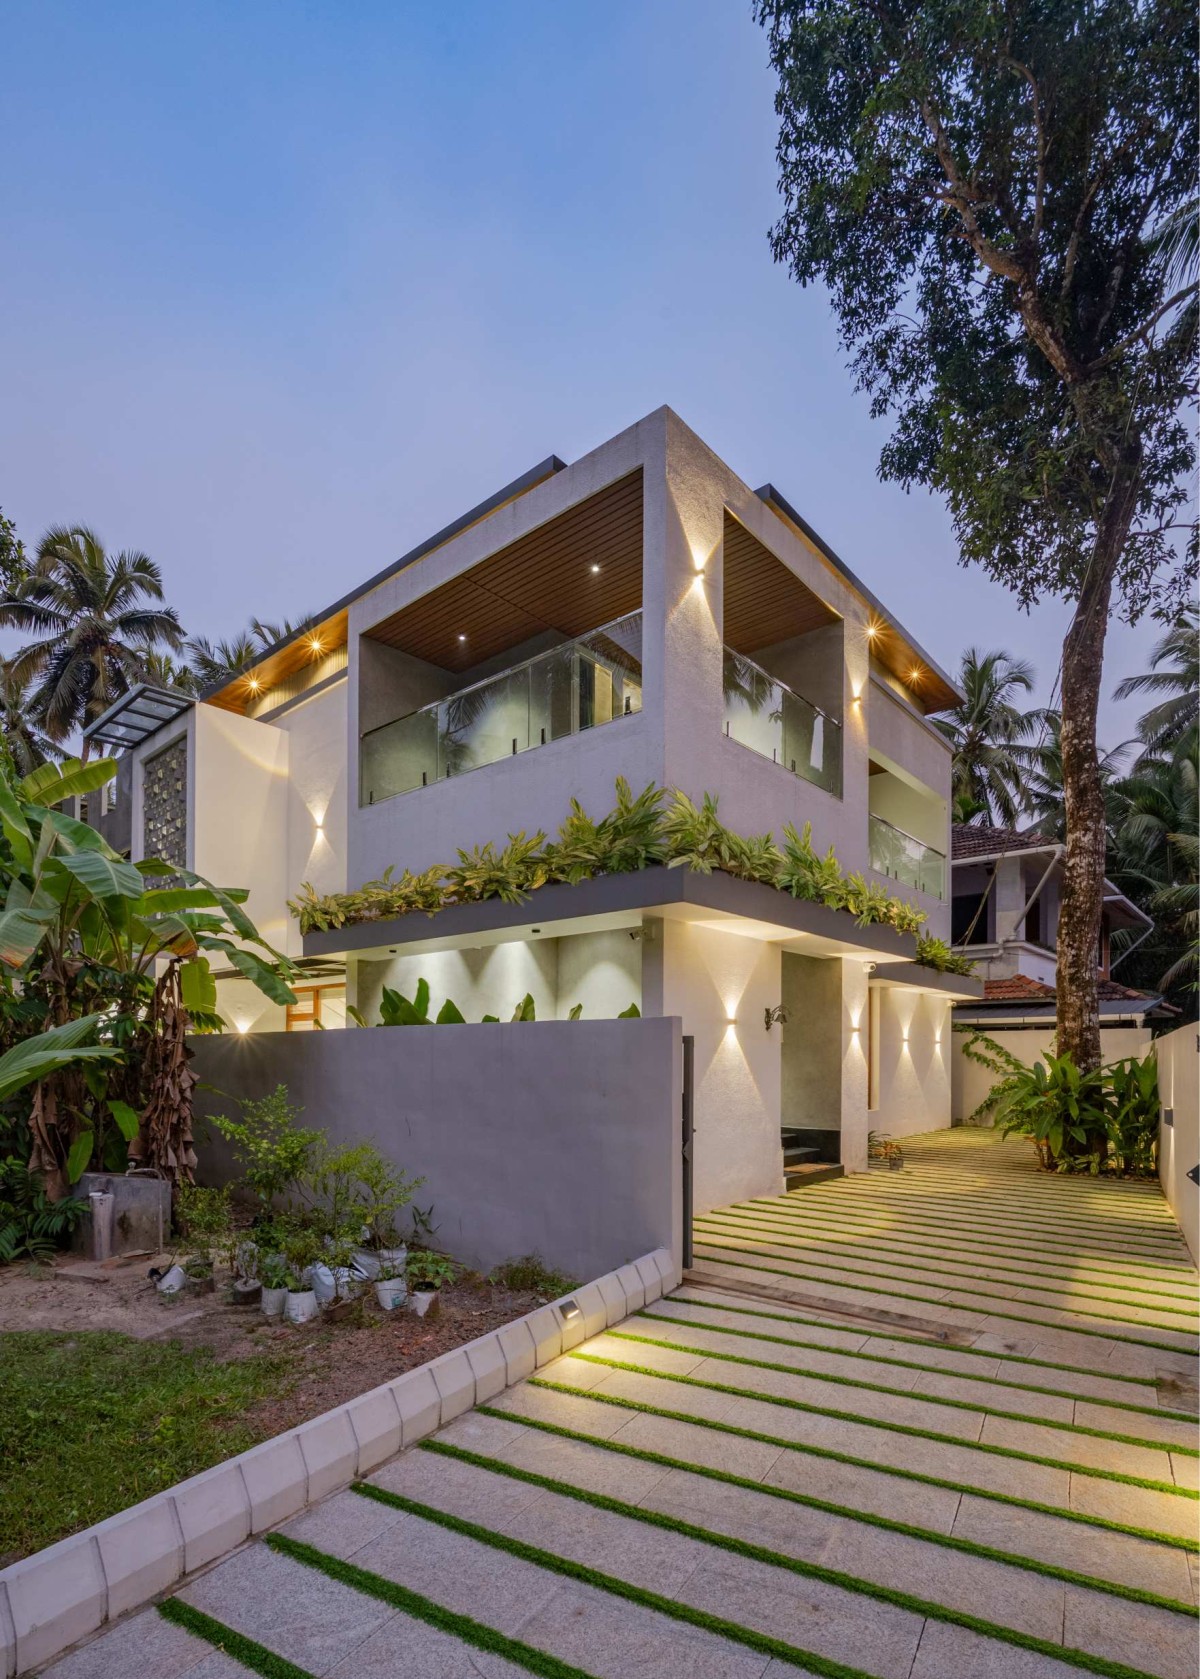 Facade-night view of The Pravasi Home by Studio Vista Architects